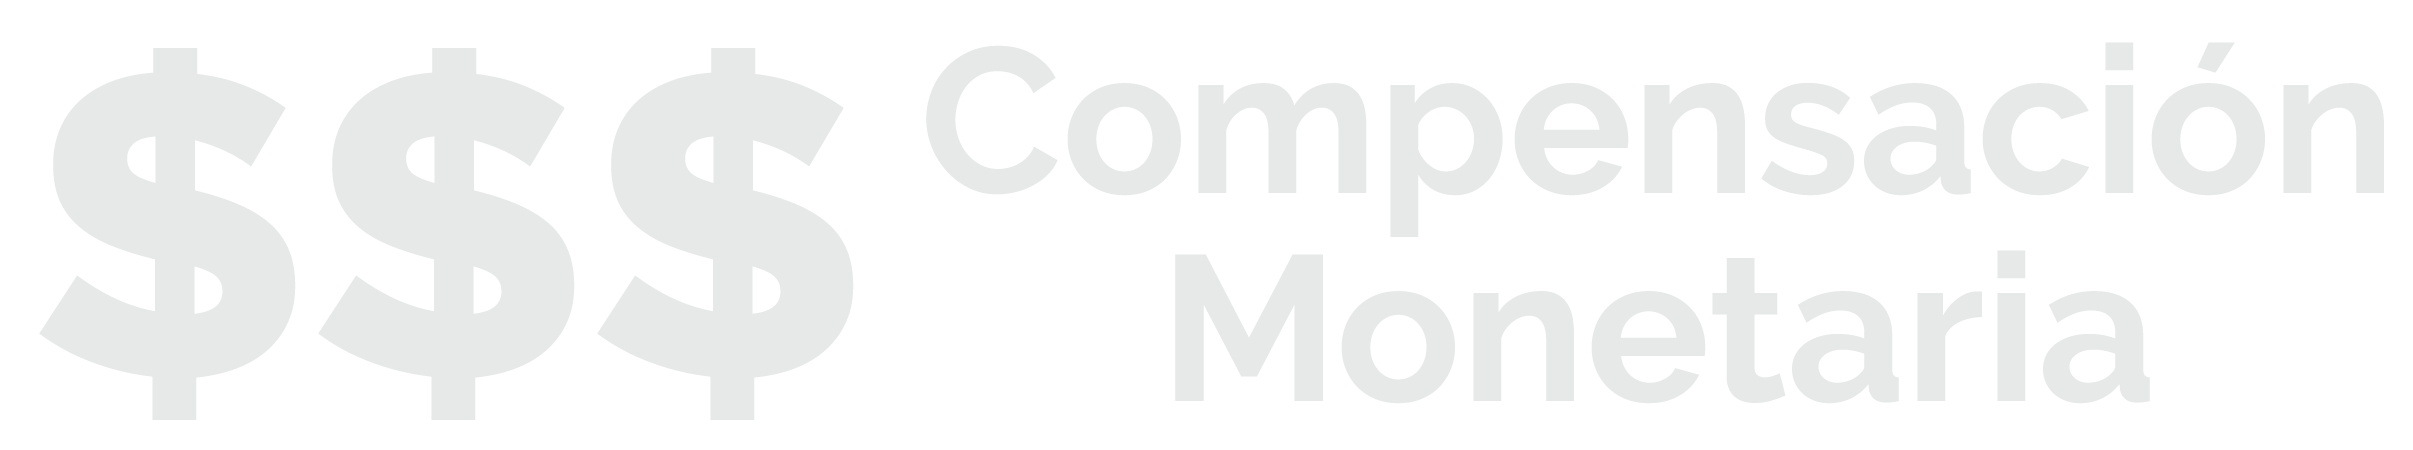 Monetary Compensation Logo for Injured workers